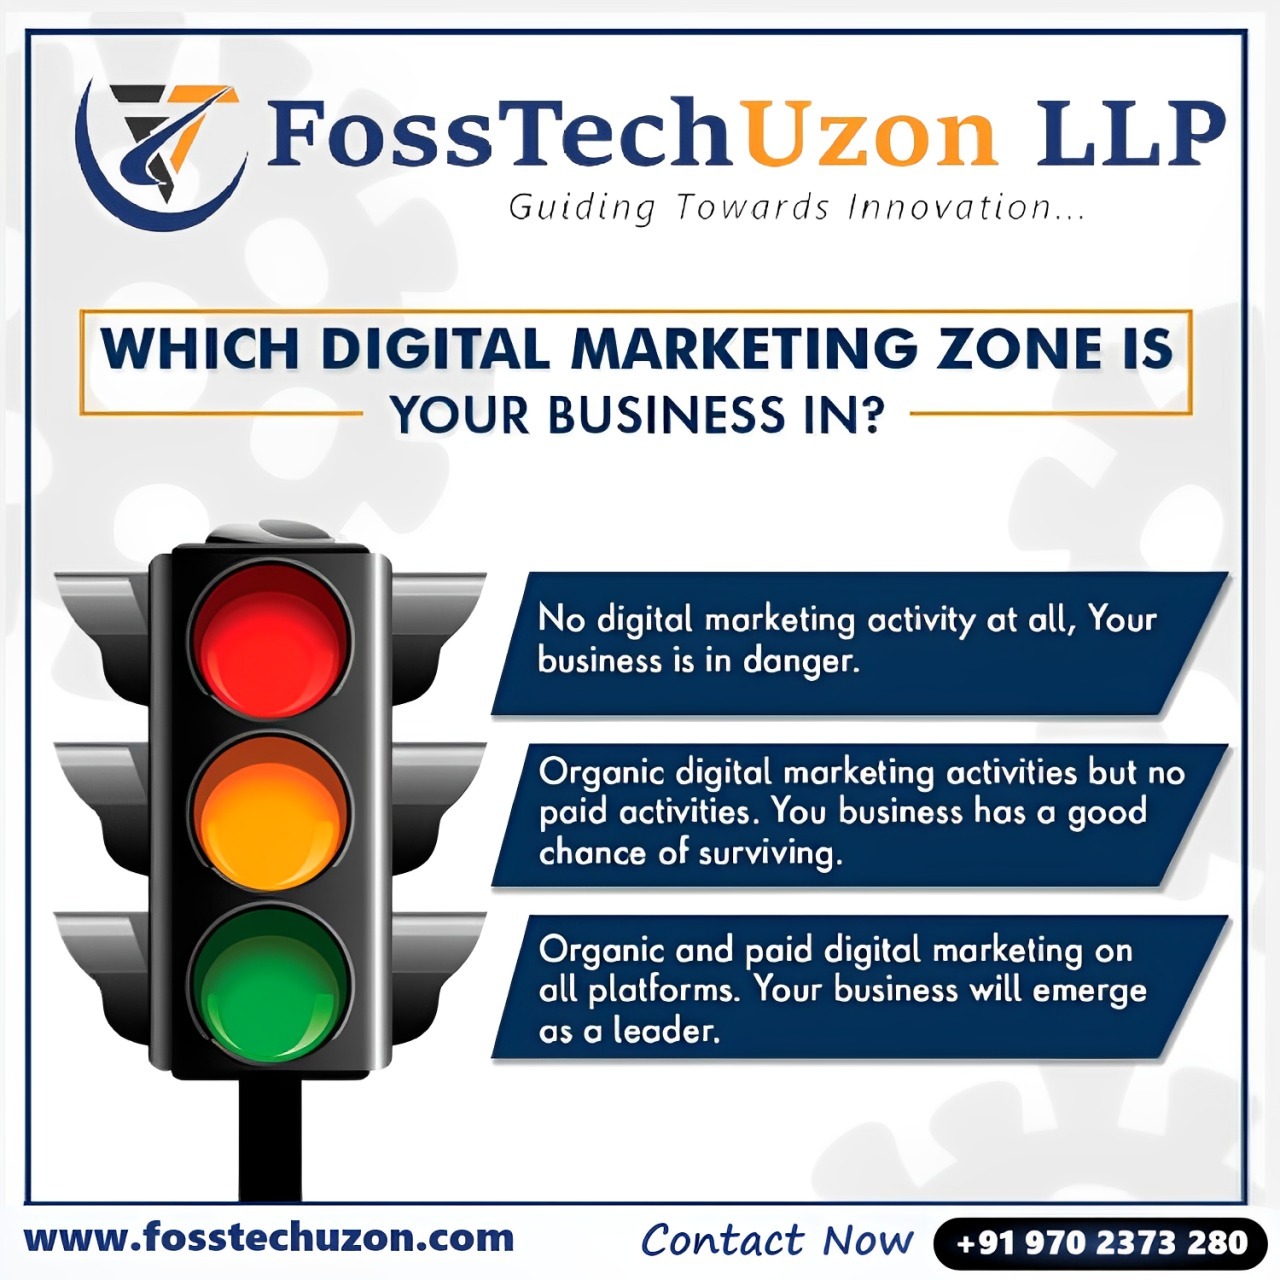 Welcome to Foss Tech Uzon LLP - Guiding Towards Innovation!